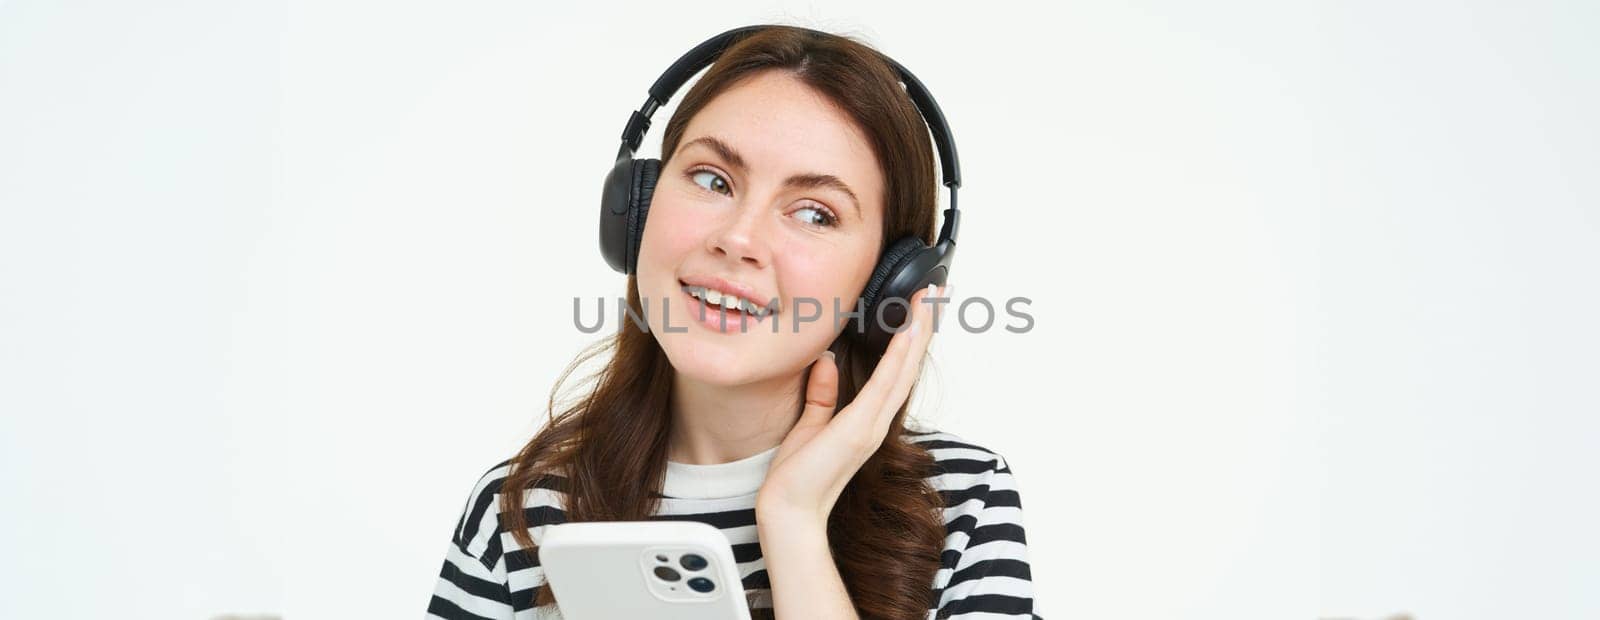 Smiling, beautiful female student in headphones, holding mobile phone, smiling and listening music, using smartphone, standing over white background.